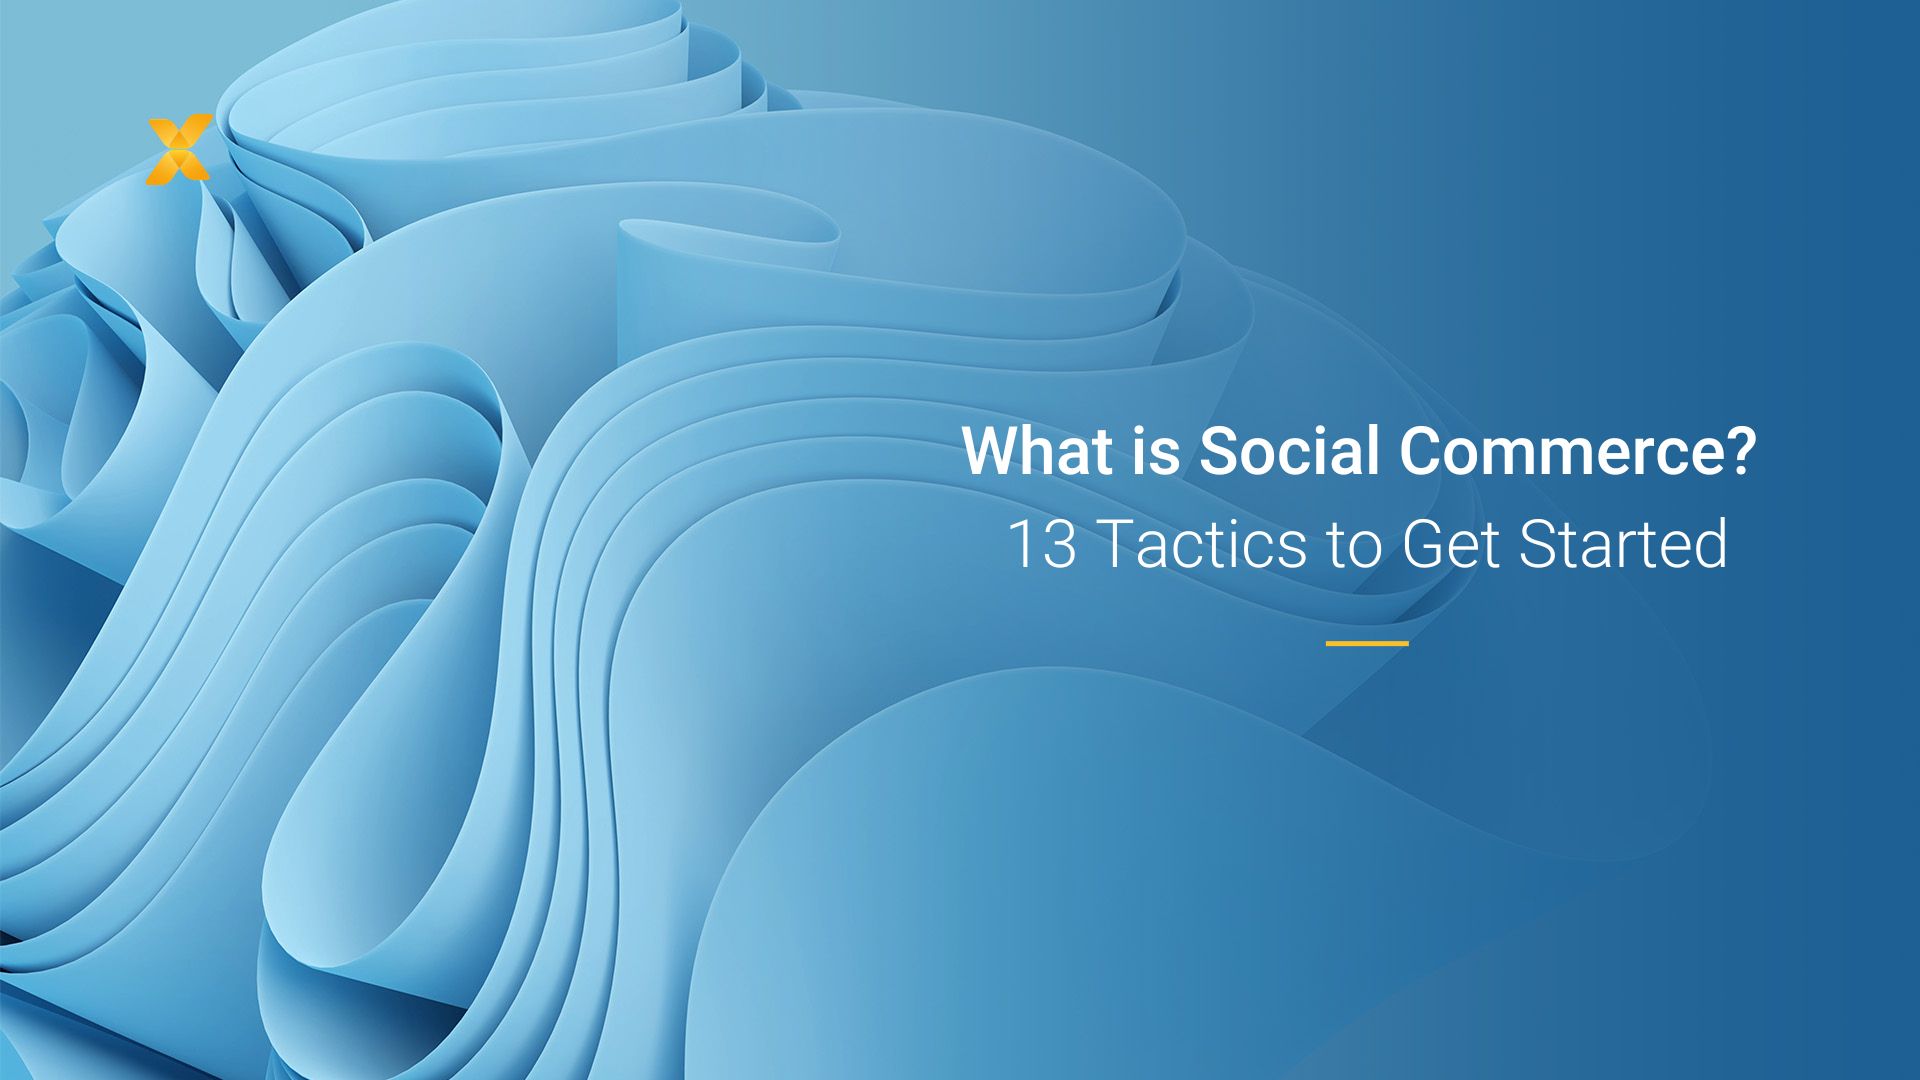 What is Social Commerce? 13 Tactics to Get Started